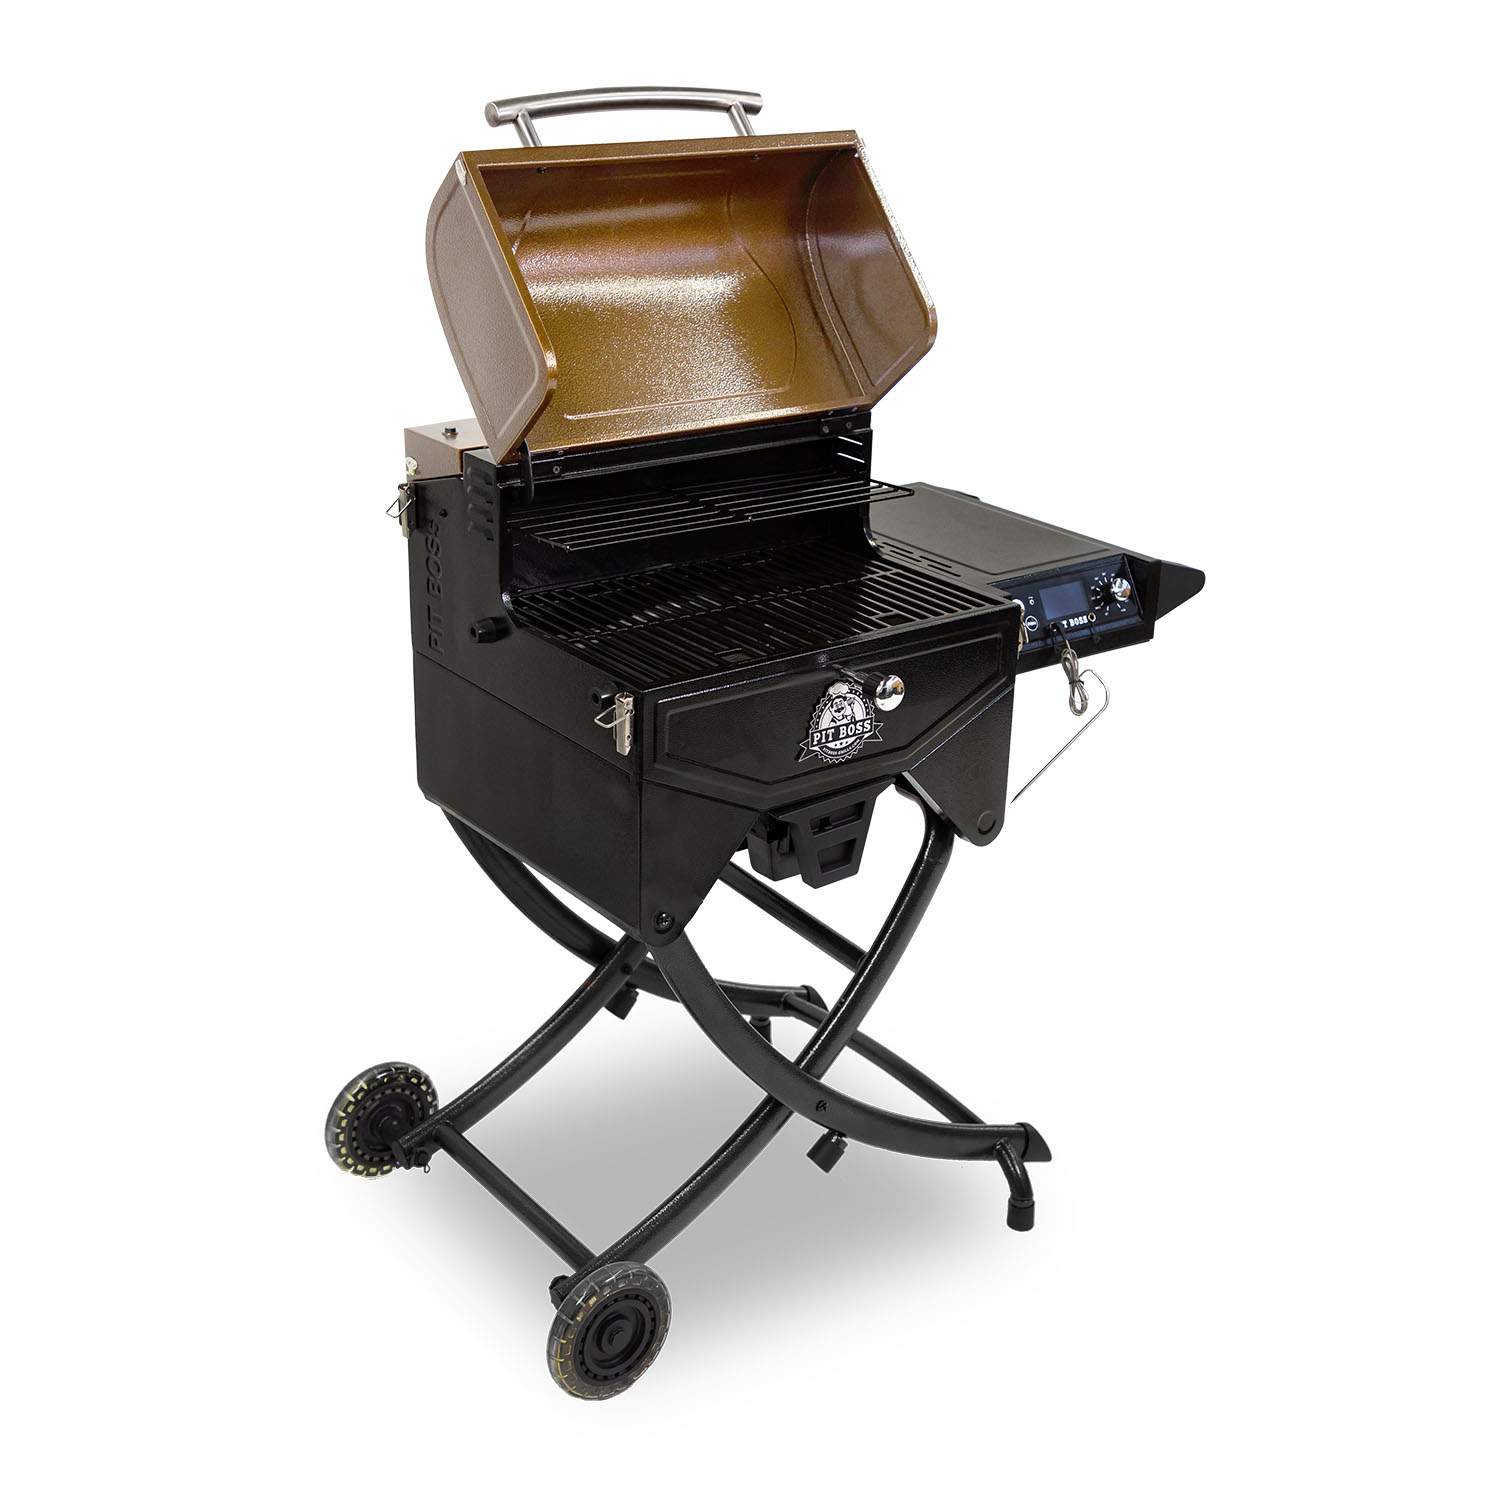 Pit Boss Portable Wood Pellet Grill, Pit Stop Smoker with foldable legs - image 4 of 8